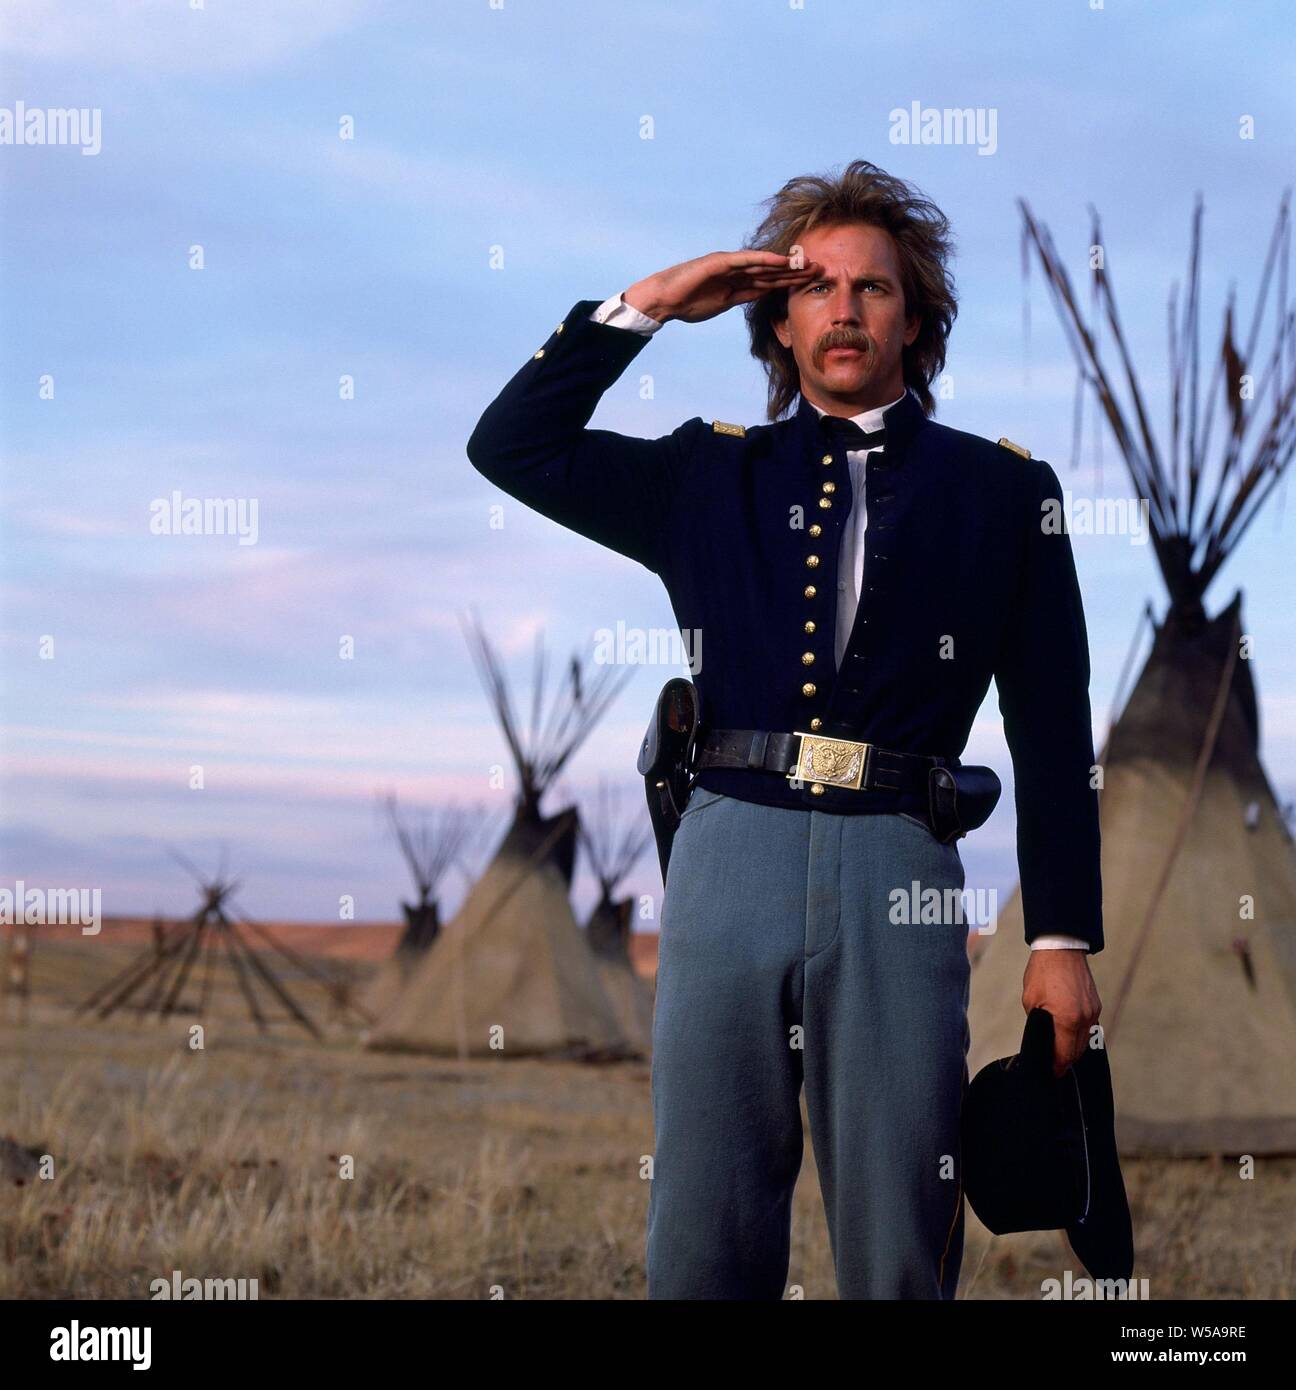 KEVIN COSTNER in DANCES WITH WOLVES (1990), directed by KEVIN COSTNER. Credit: ORION PICTURES / Album Stock Photo